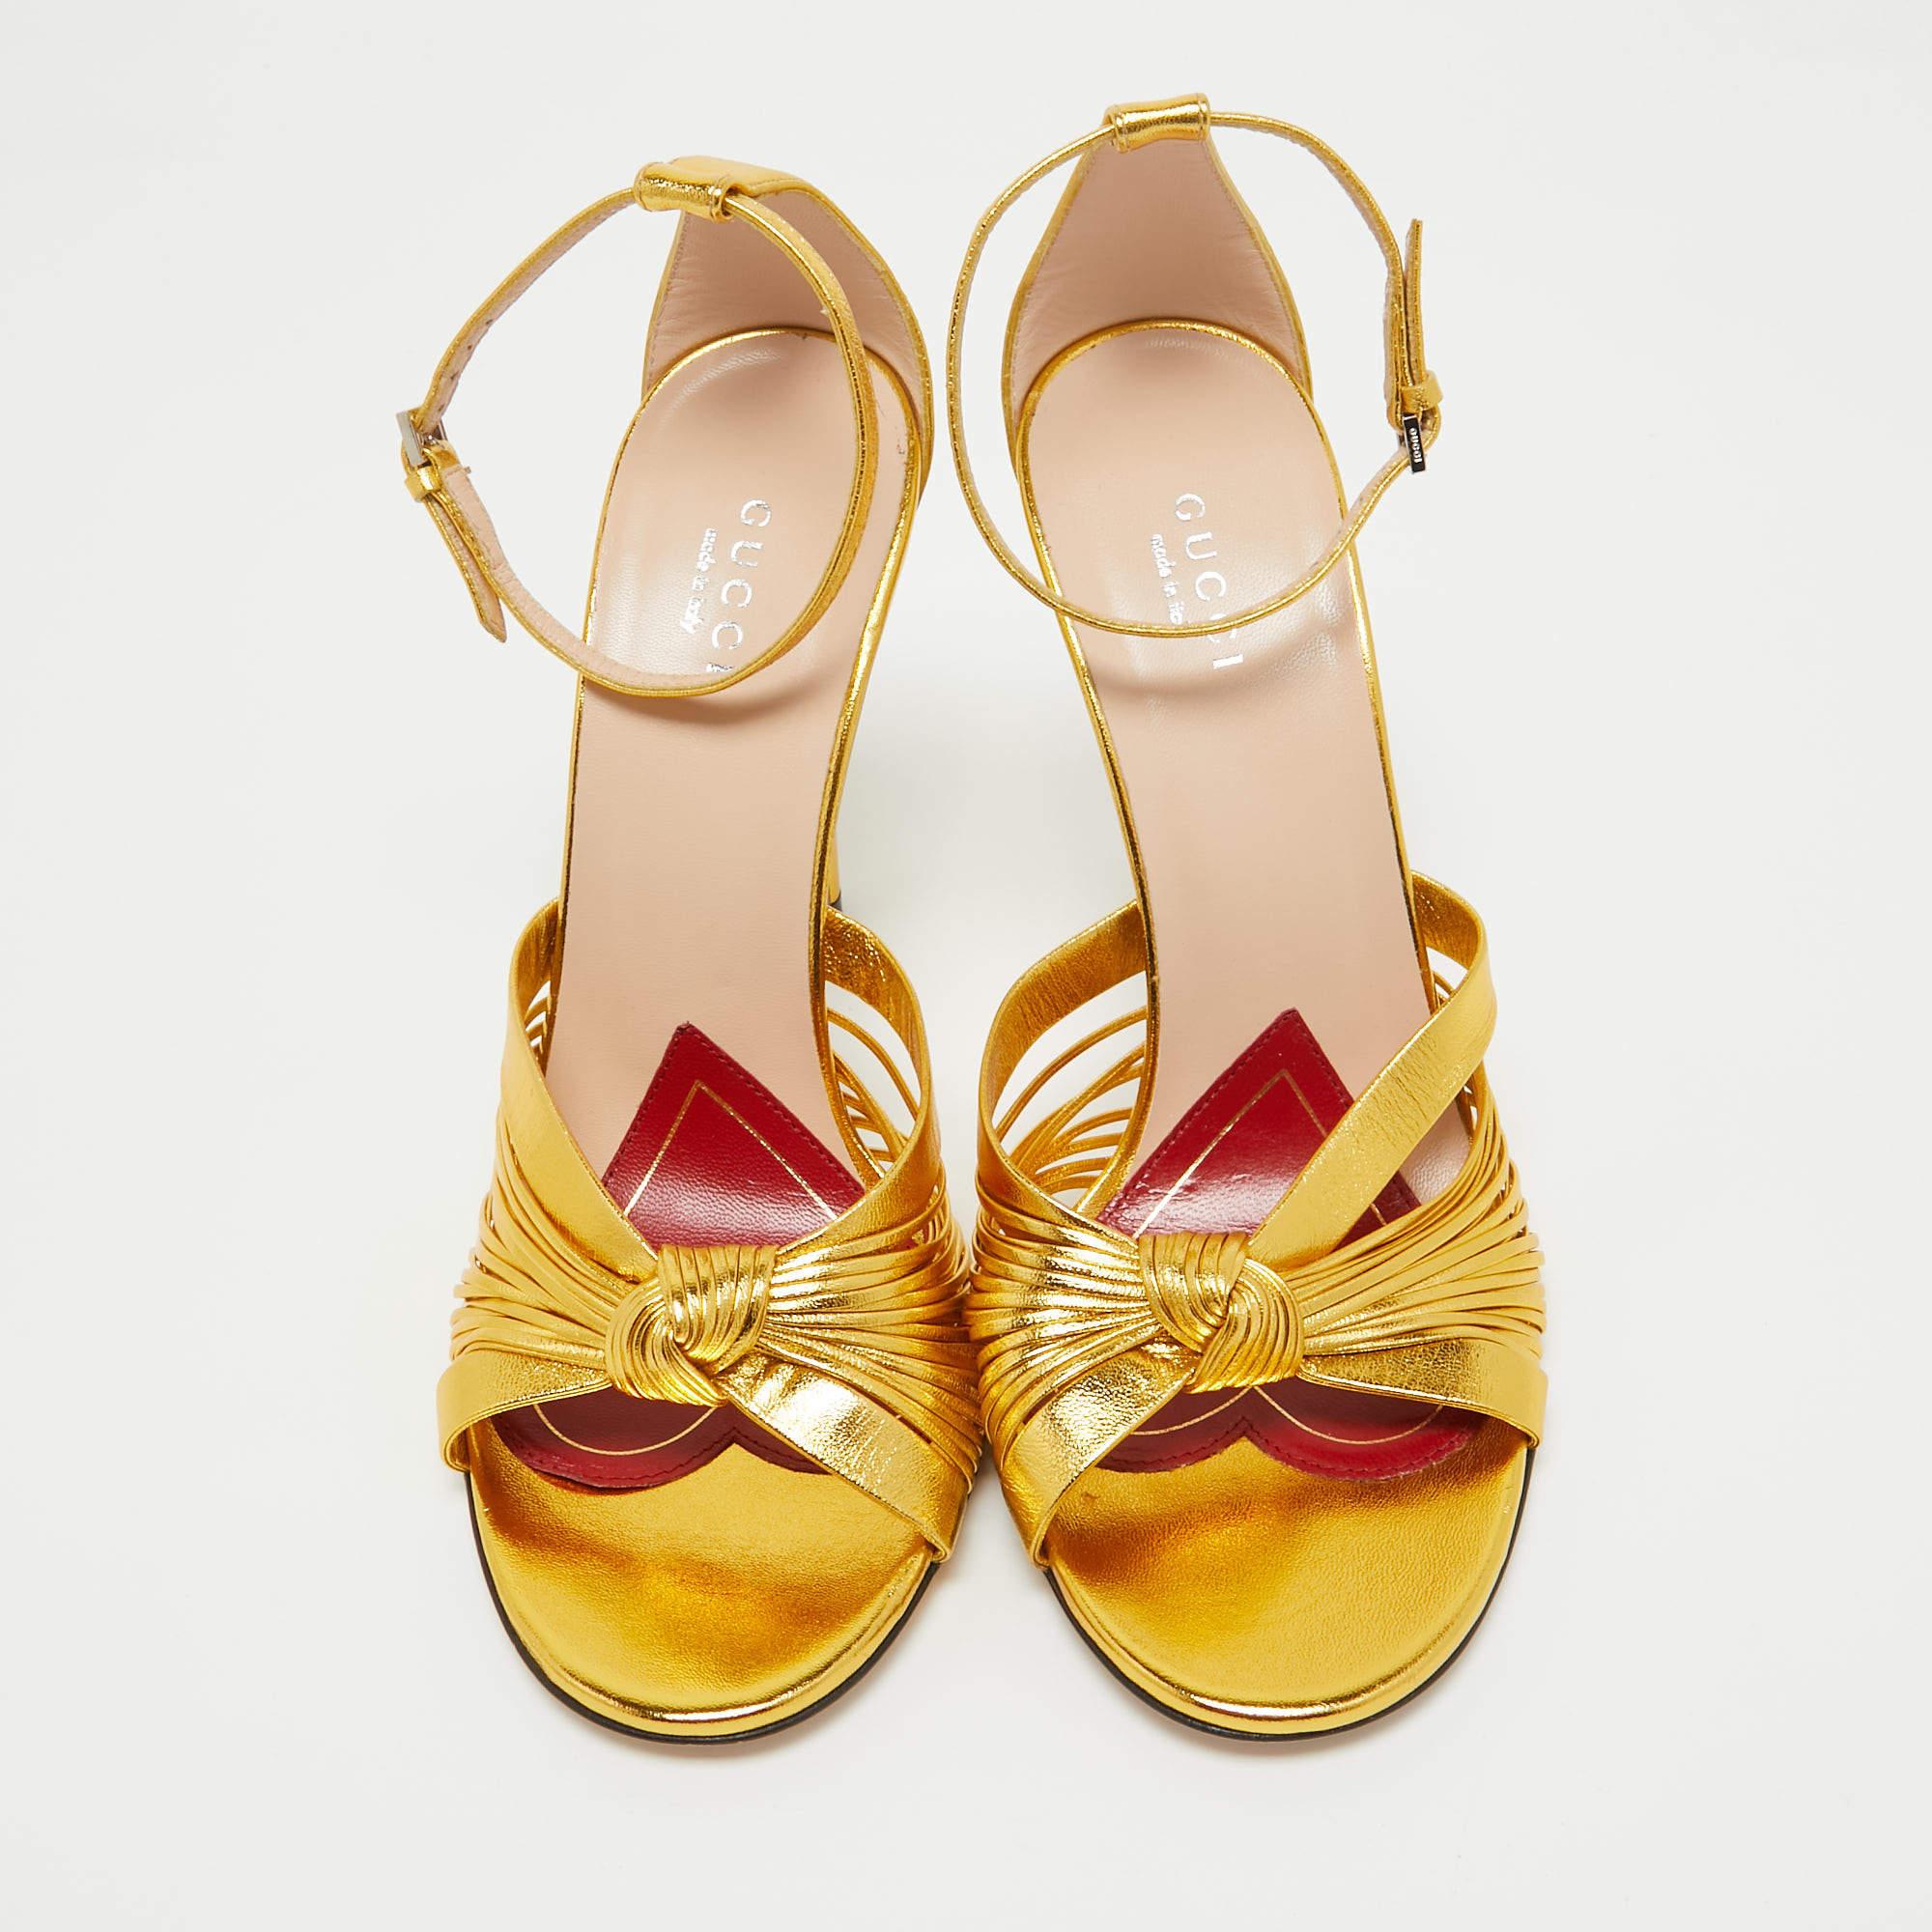 Beauty flows out of these sandals from Gucci! Crafted from metallic gold leather, these sandals have knotted gathering over the toes, open counters with ankle buckle straps and 10 cm heels to help you stand tall.

